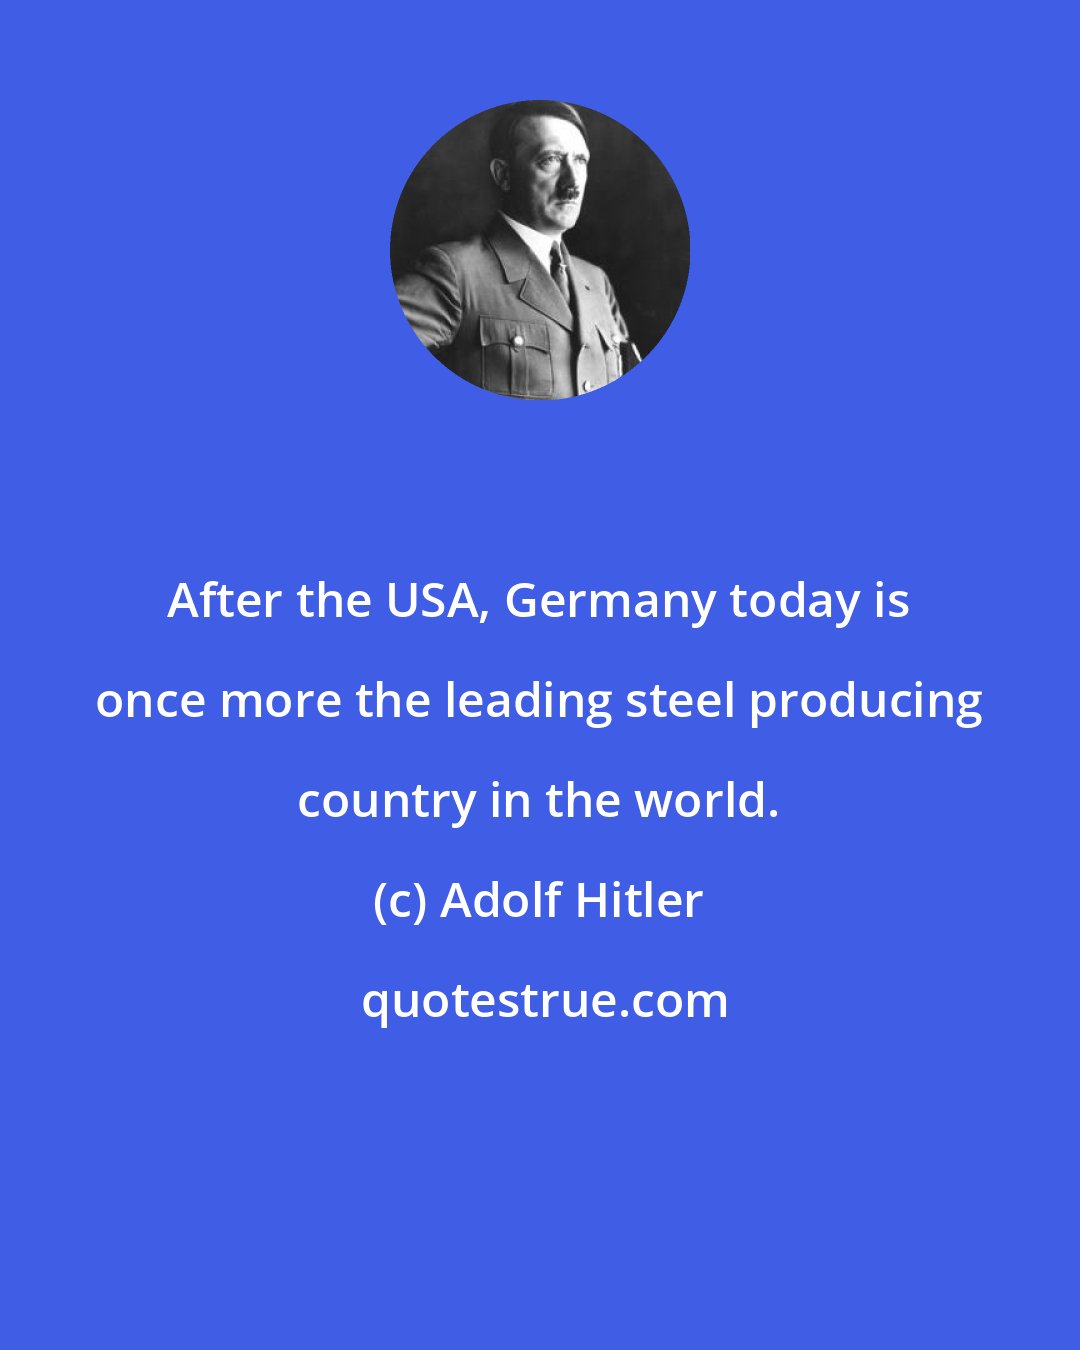 Adolf Hitler: After the USA, Germany today is once more the leading steel producing country in the world.